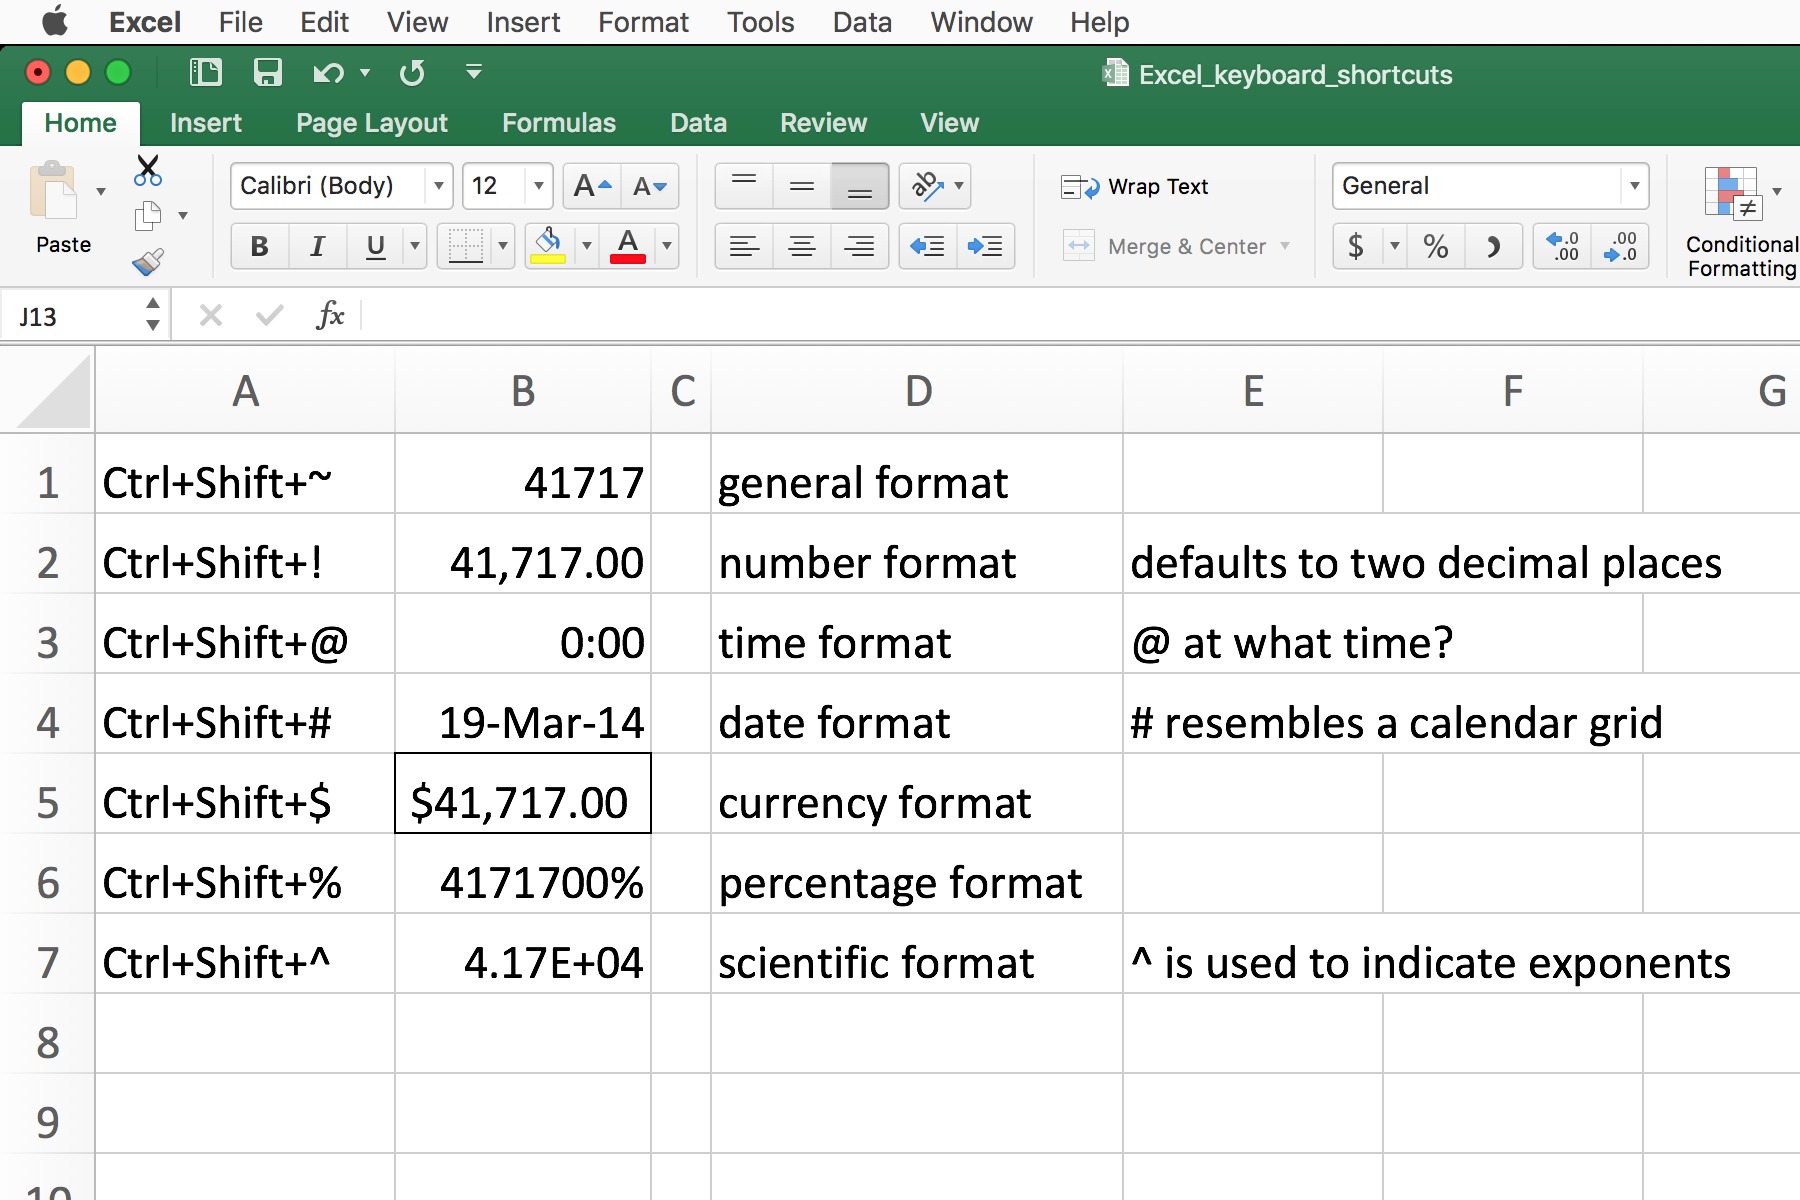 Excel manual calculation mode